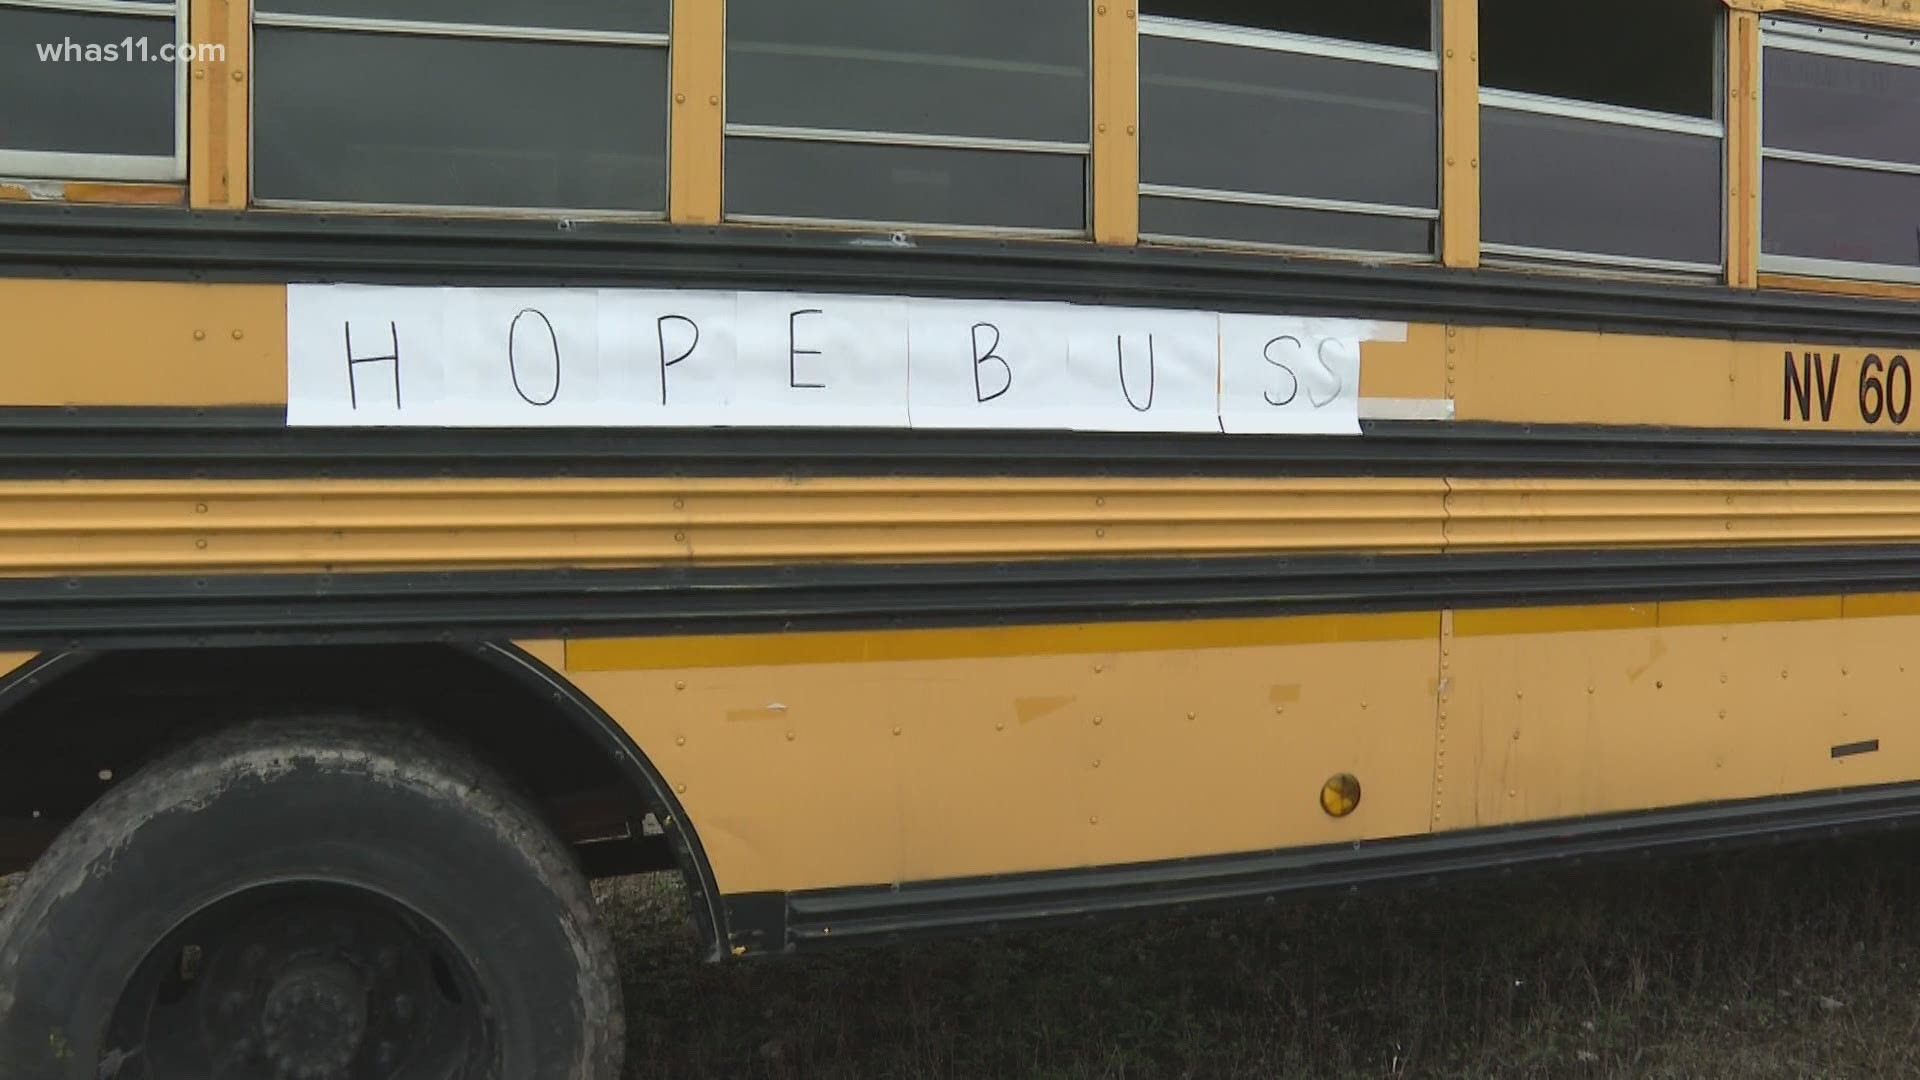 The Hope Buss works to bridge the gap between local organizations and the community by attacking hopelessness at its core, according to their website.